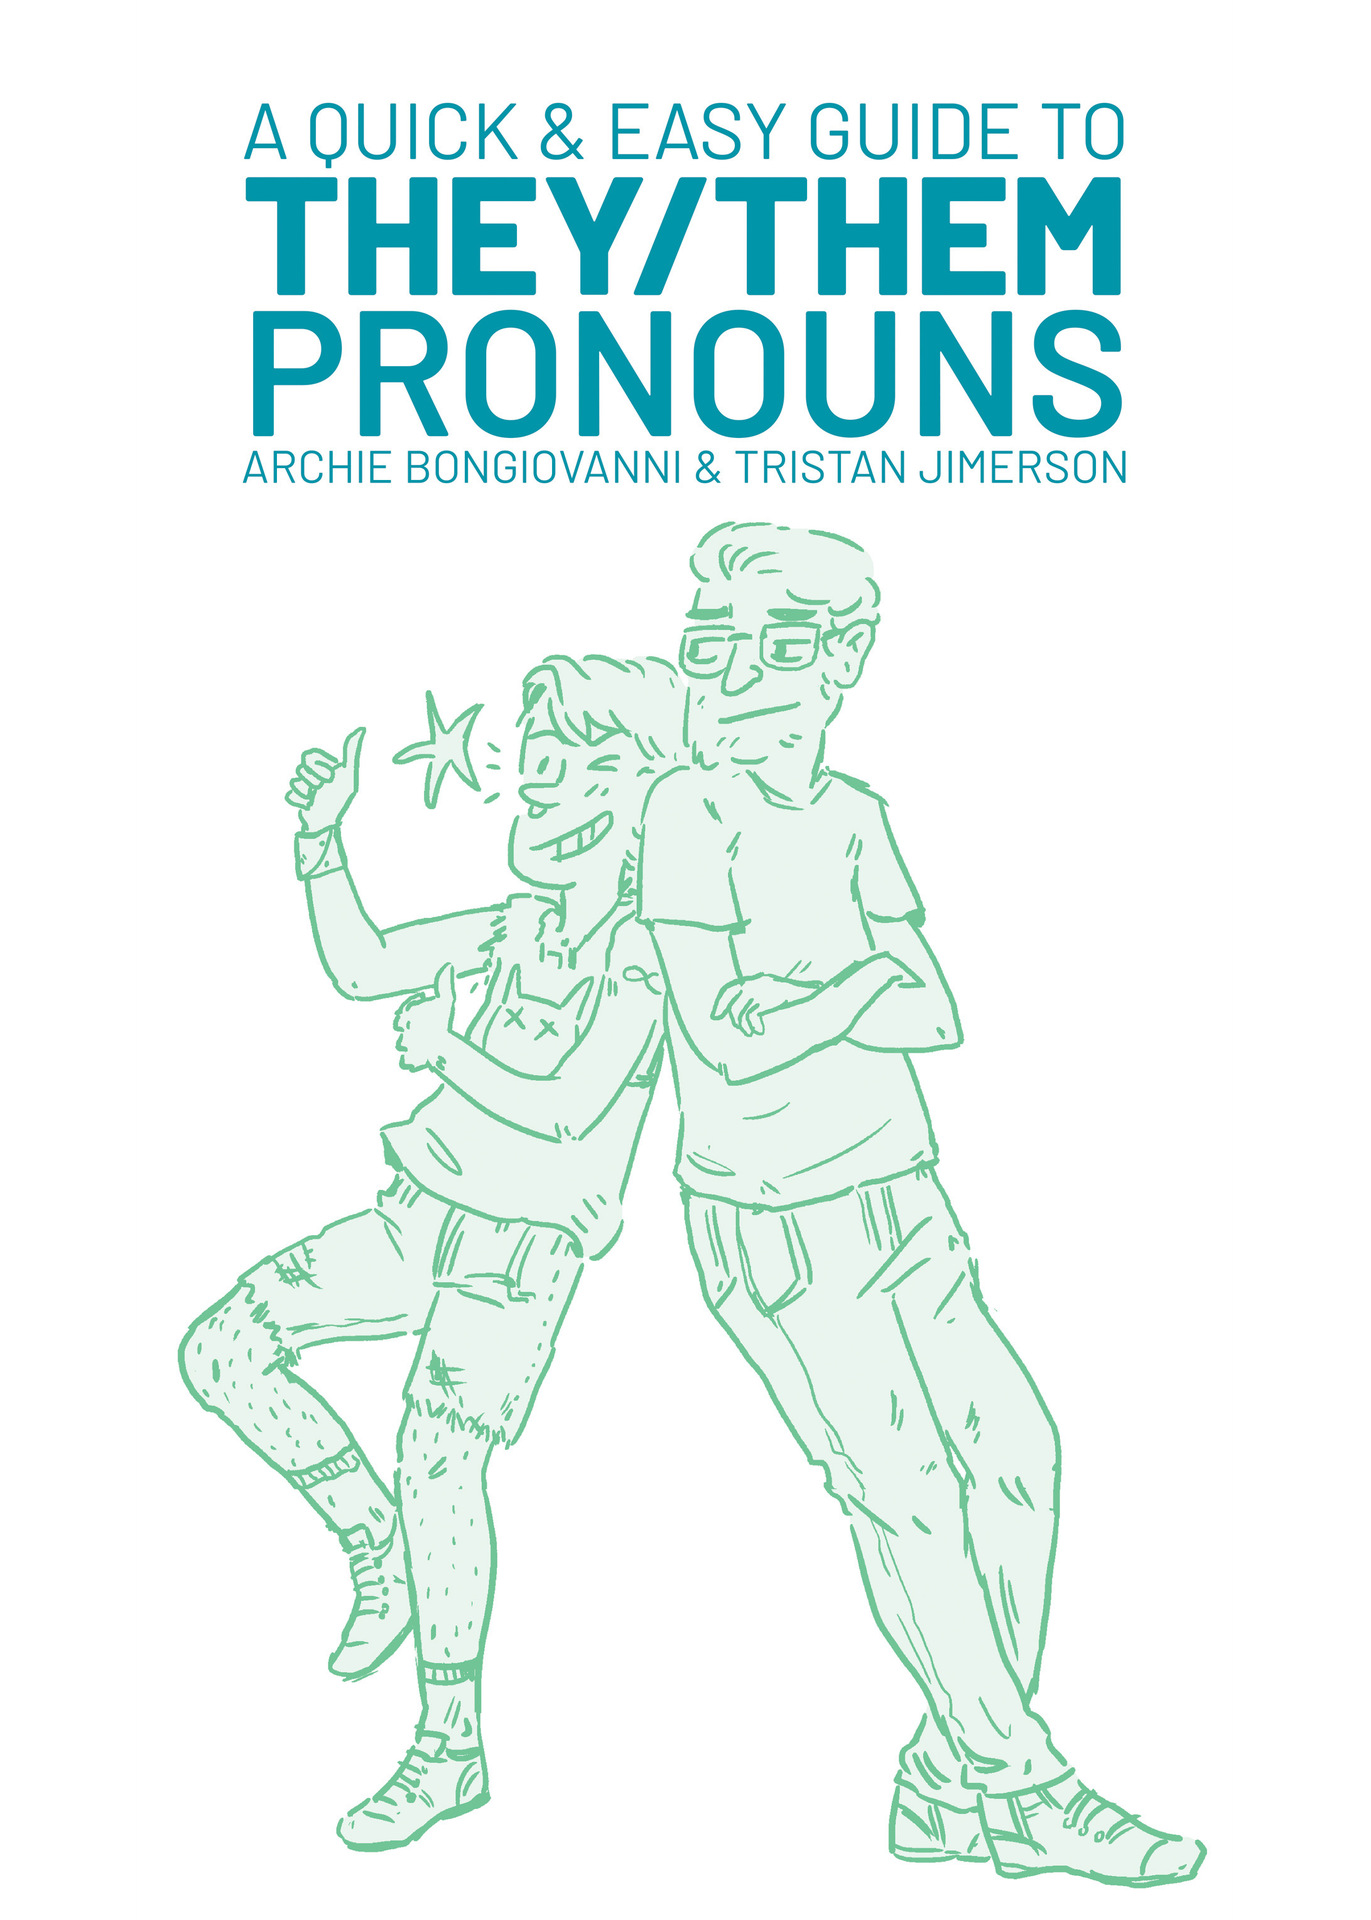 Archie Bongiovanni: A quick & easy guide to they/them pronouns (2018, Limerence Press)